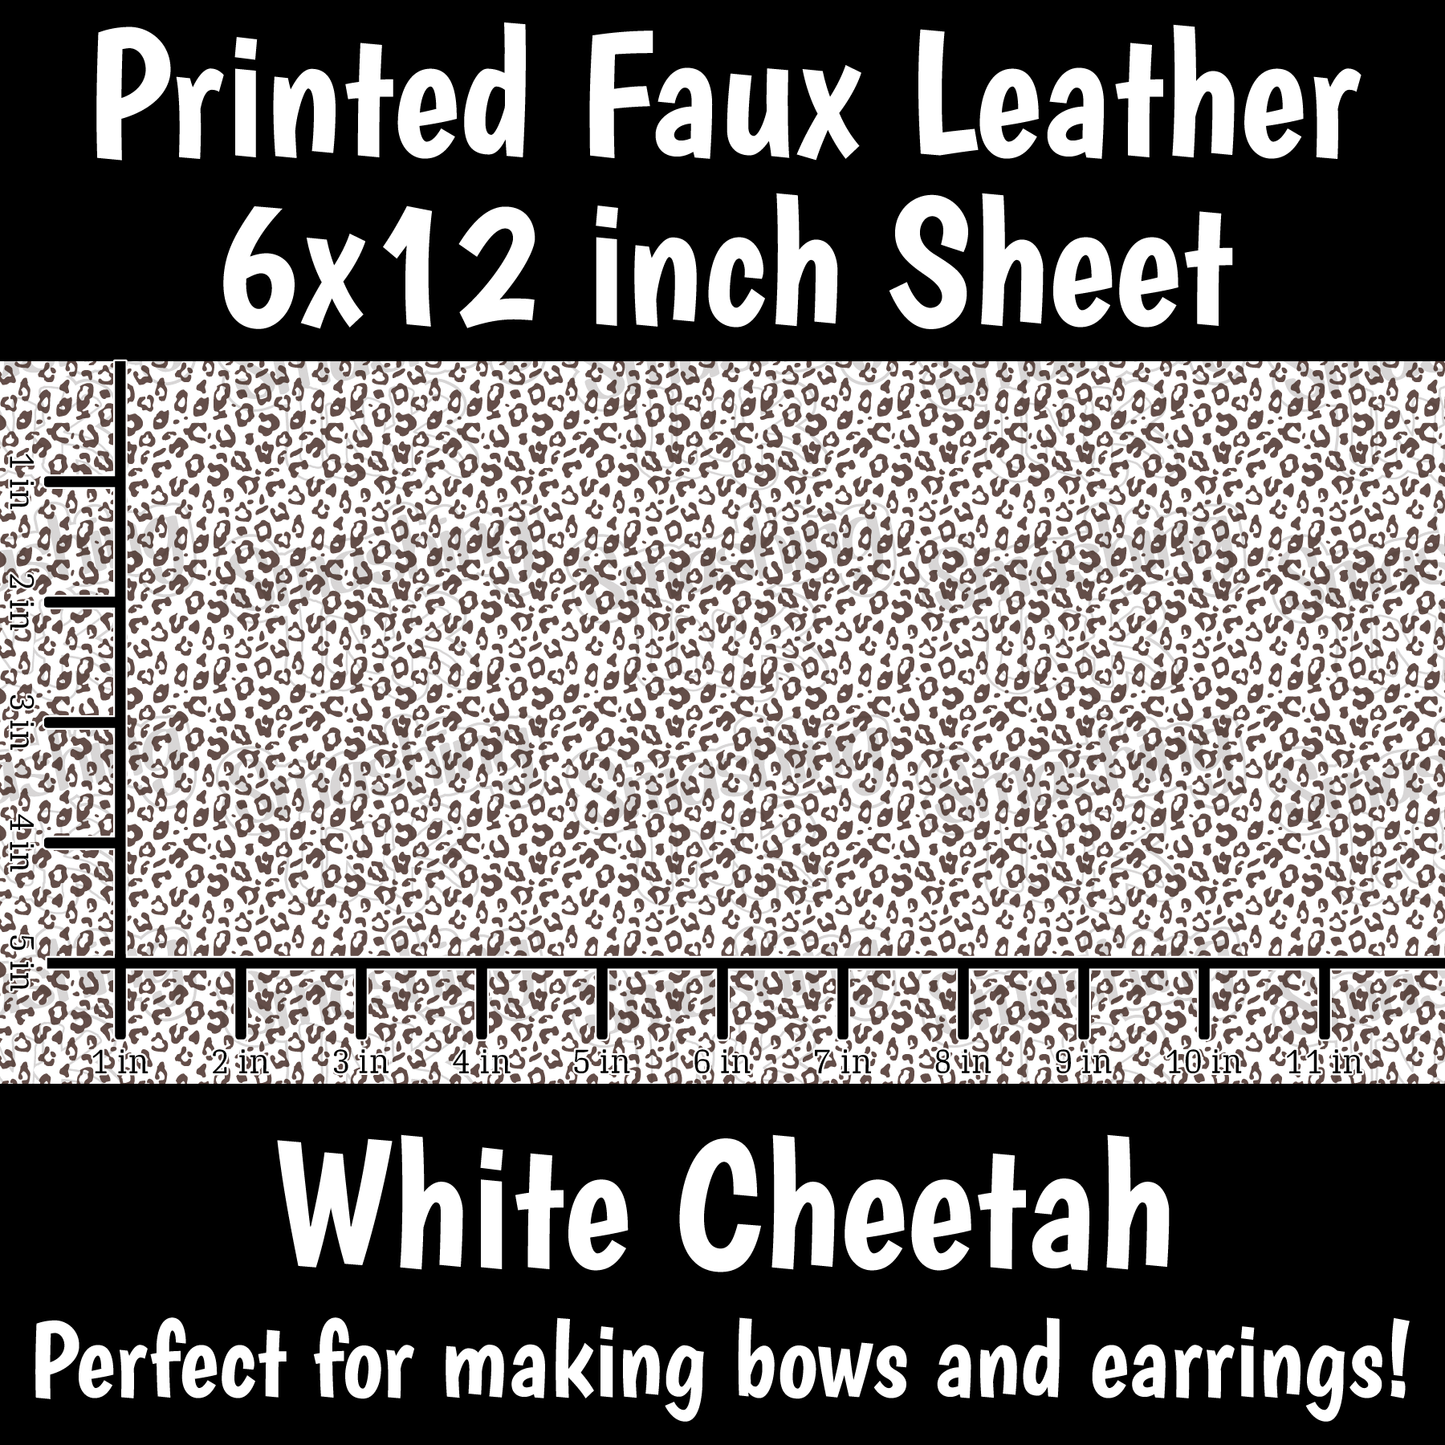 White Cheetah Print - Faux Leather Sheet (SHIPS IN 3 BUS DAYS)